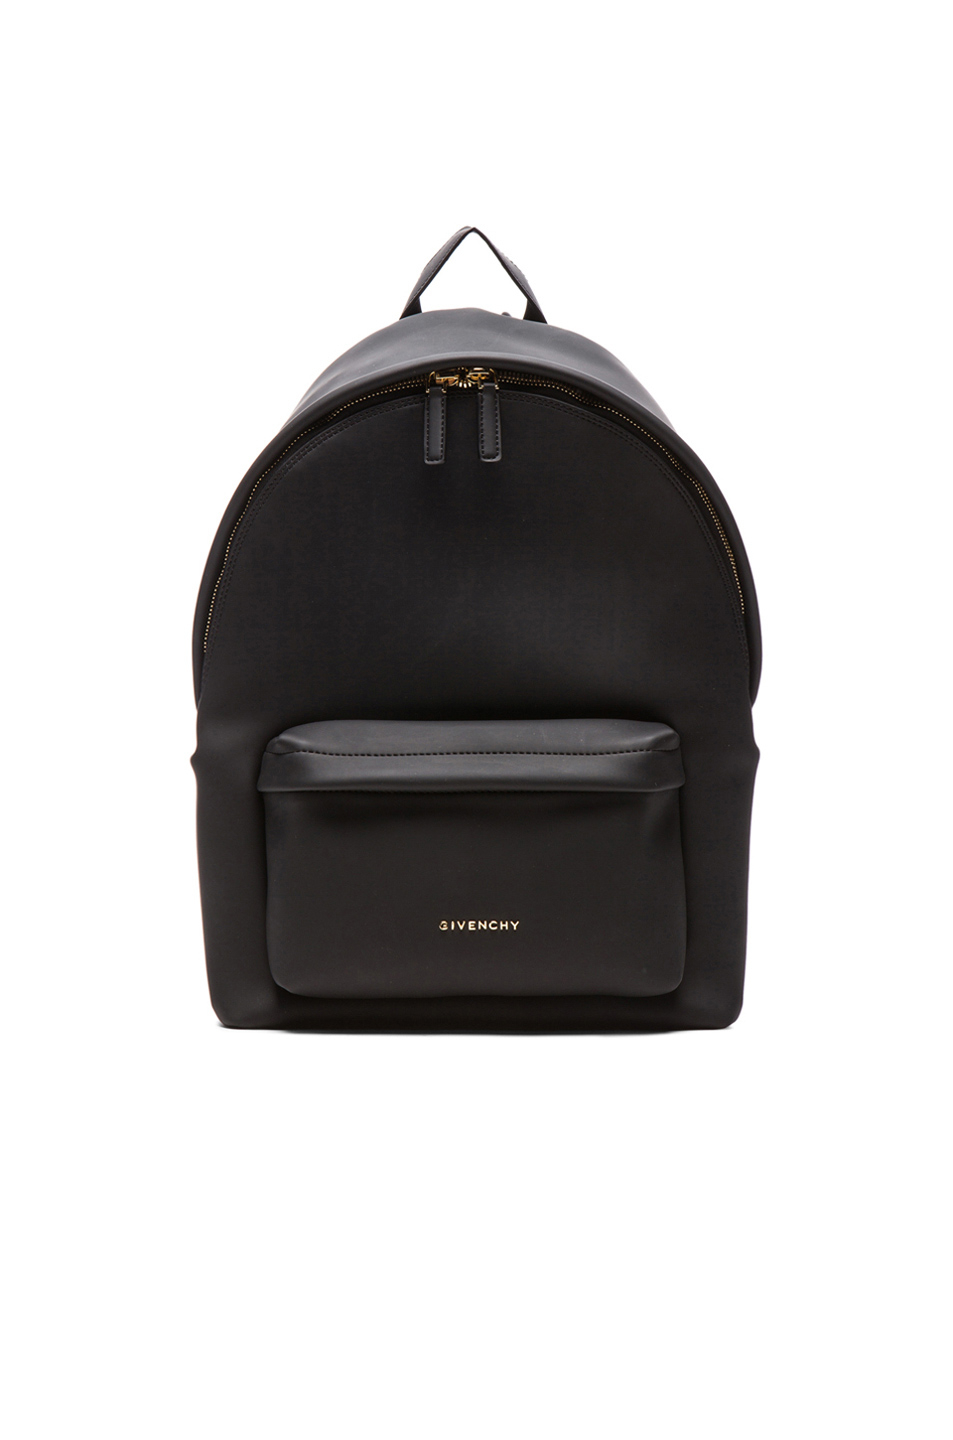 givenchy backpack women